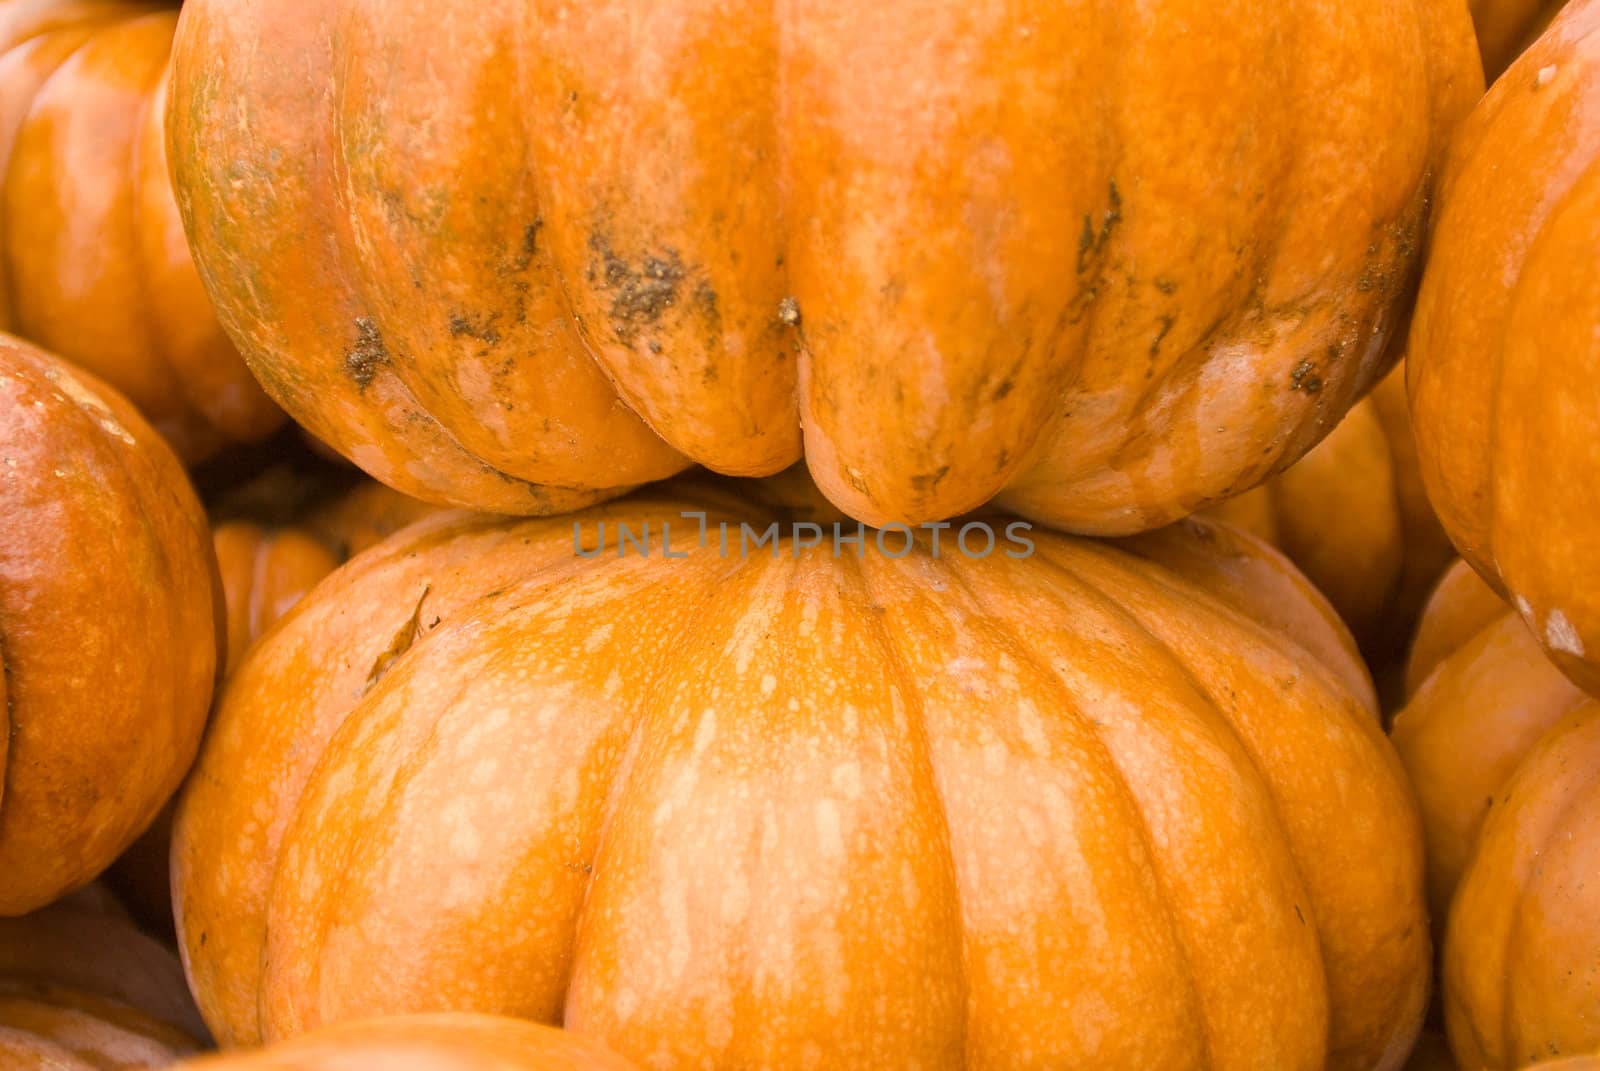 colorful pumpkins stacked for buyers